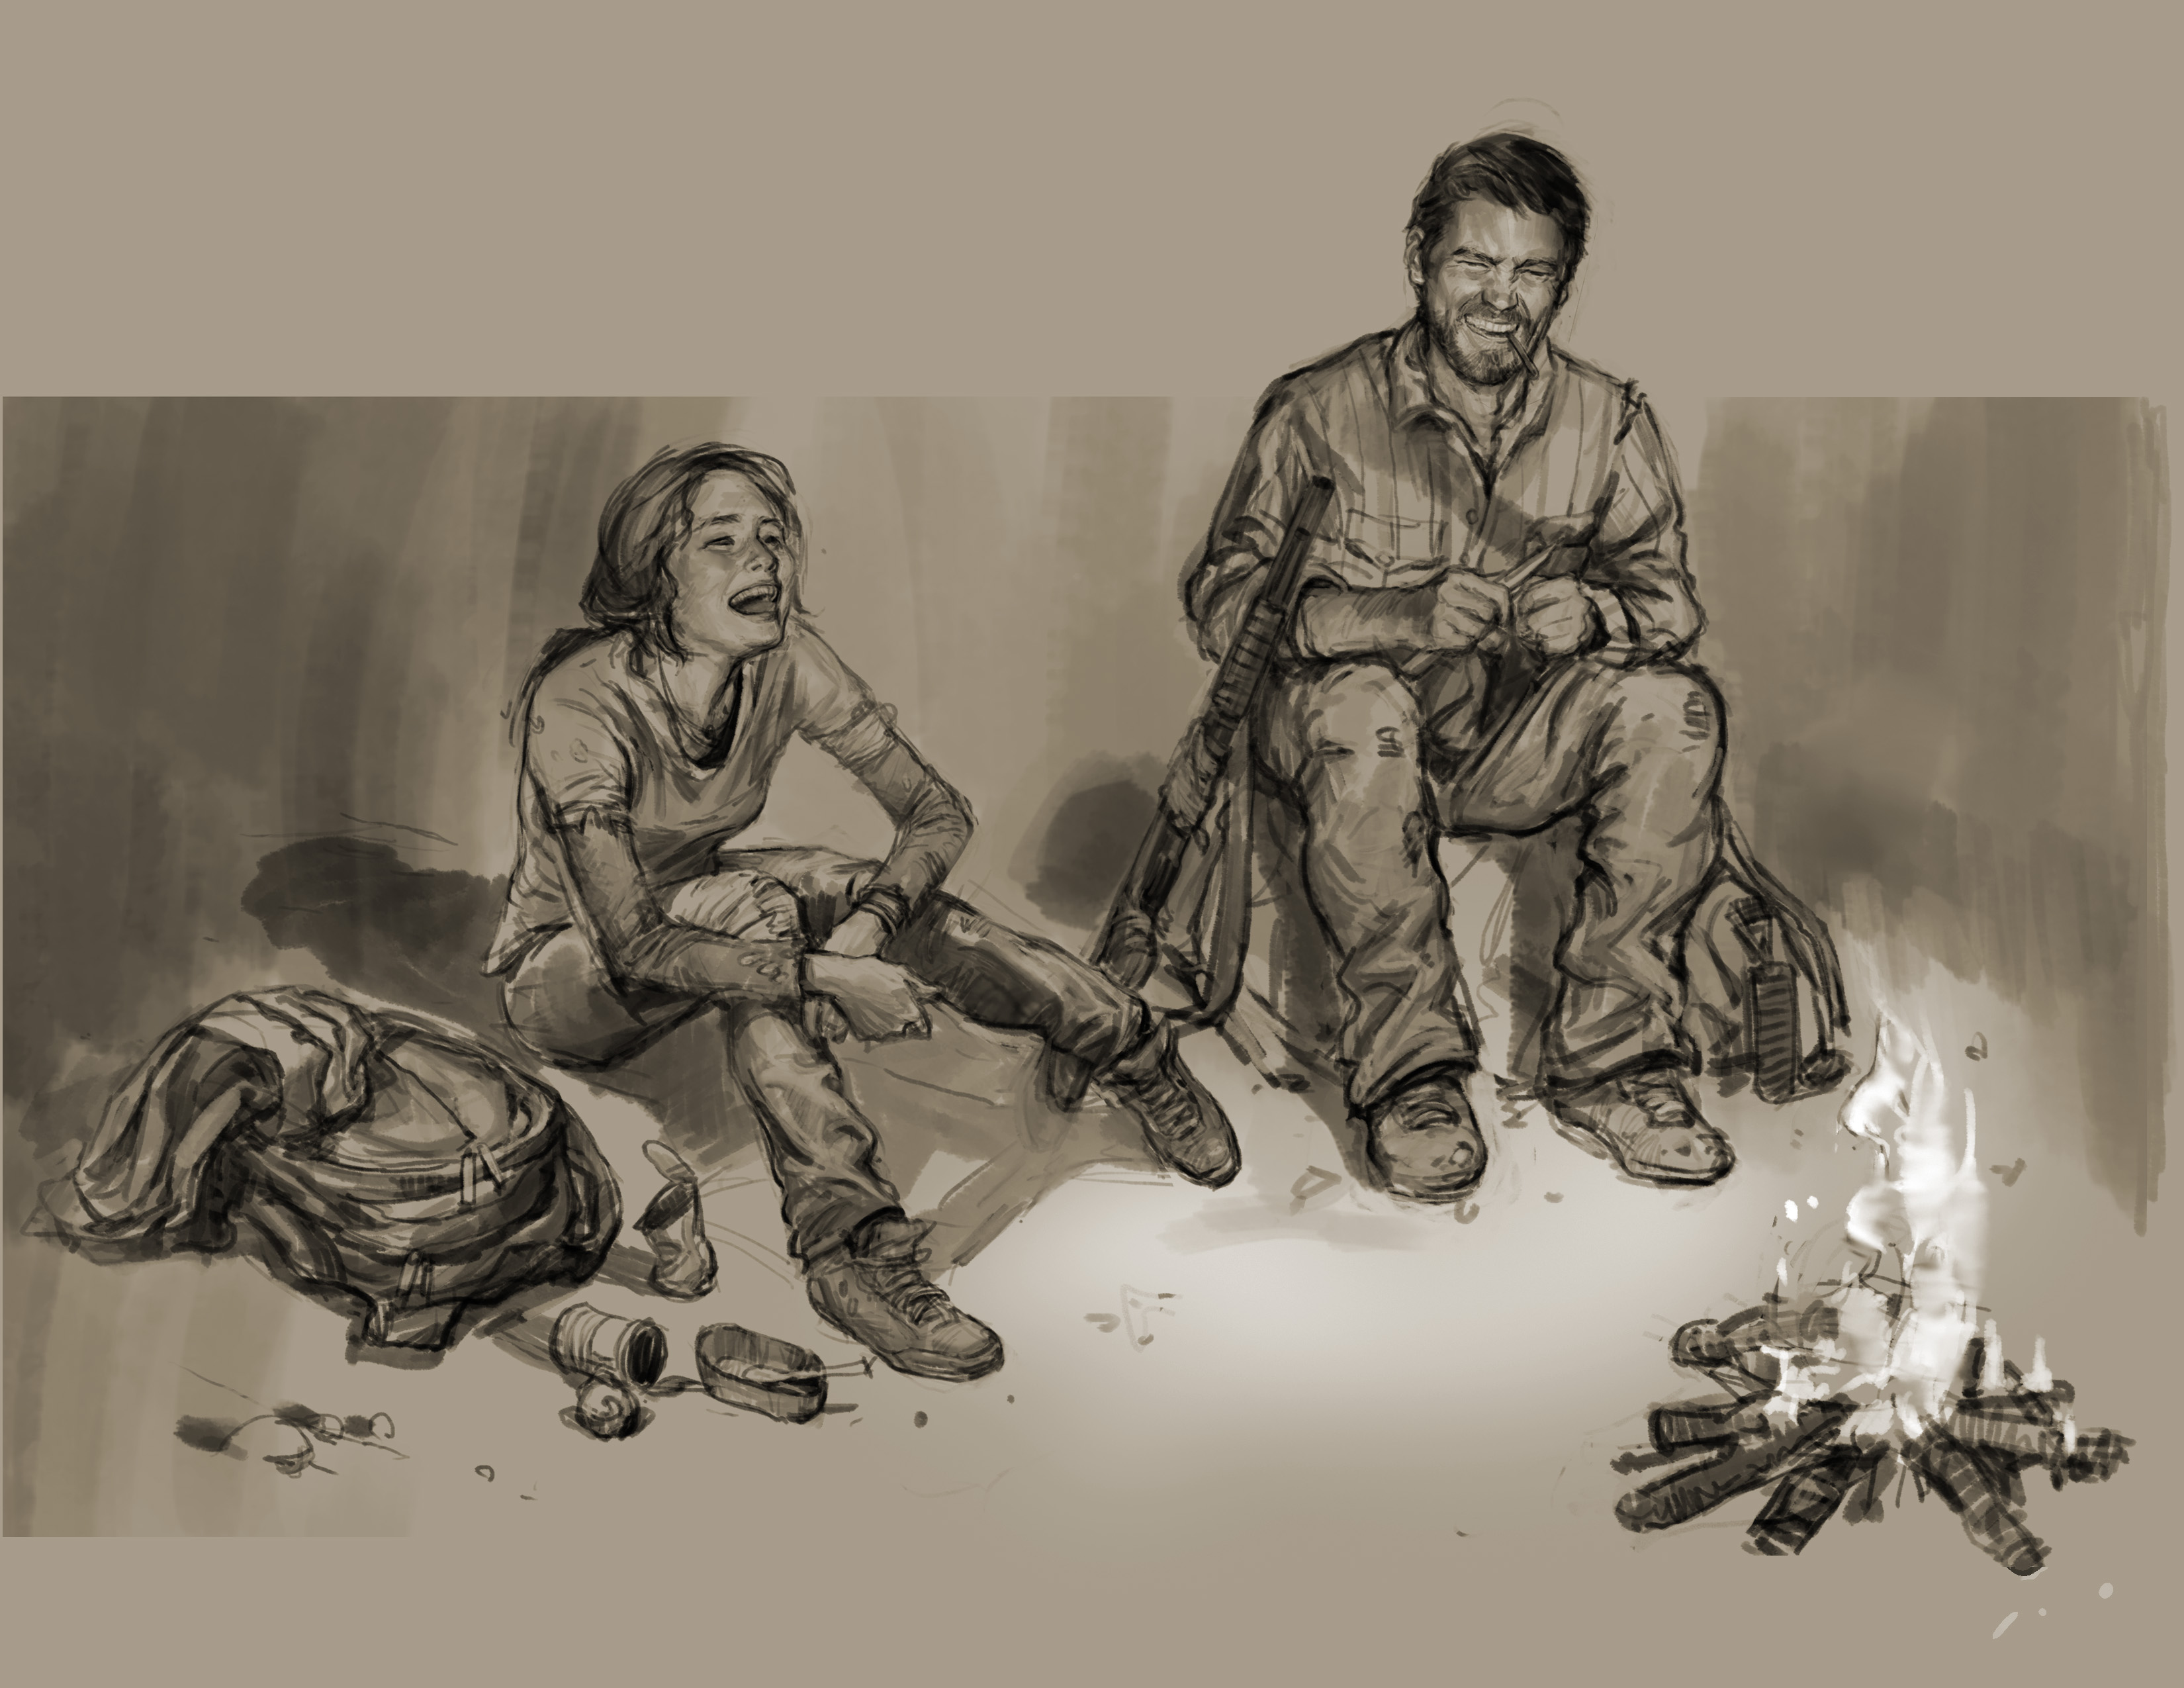 Character sketch, The Last of Us (2013, 2014 Sony Interactive Entertainment LLC. The Last of Us is a trademark of Sony Interactive Entertainment LLC. Created and developed by Naughty Dog LLC)